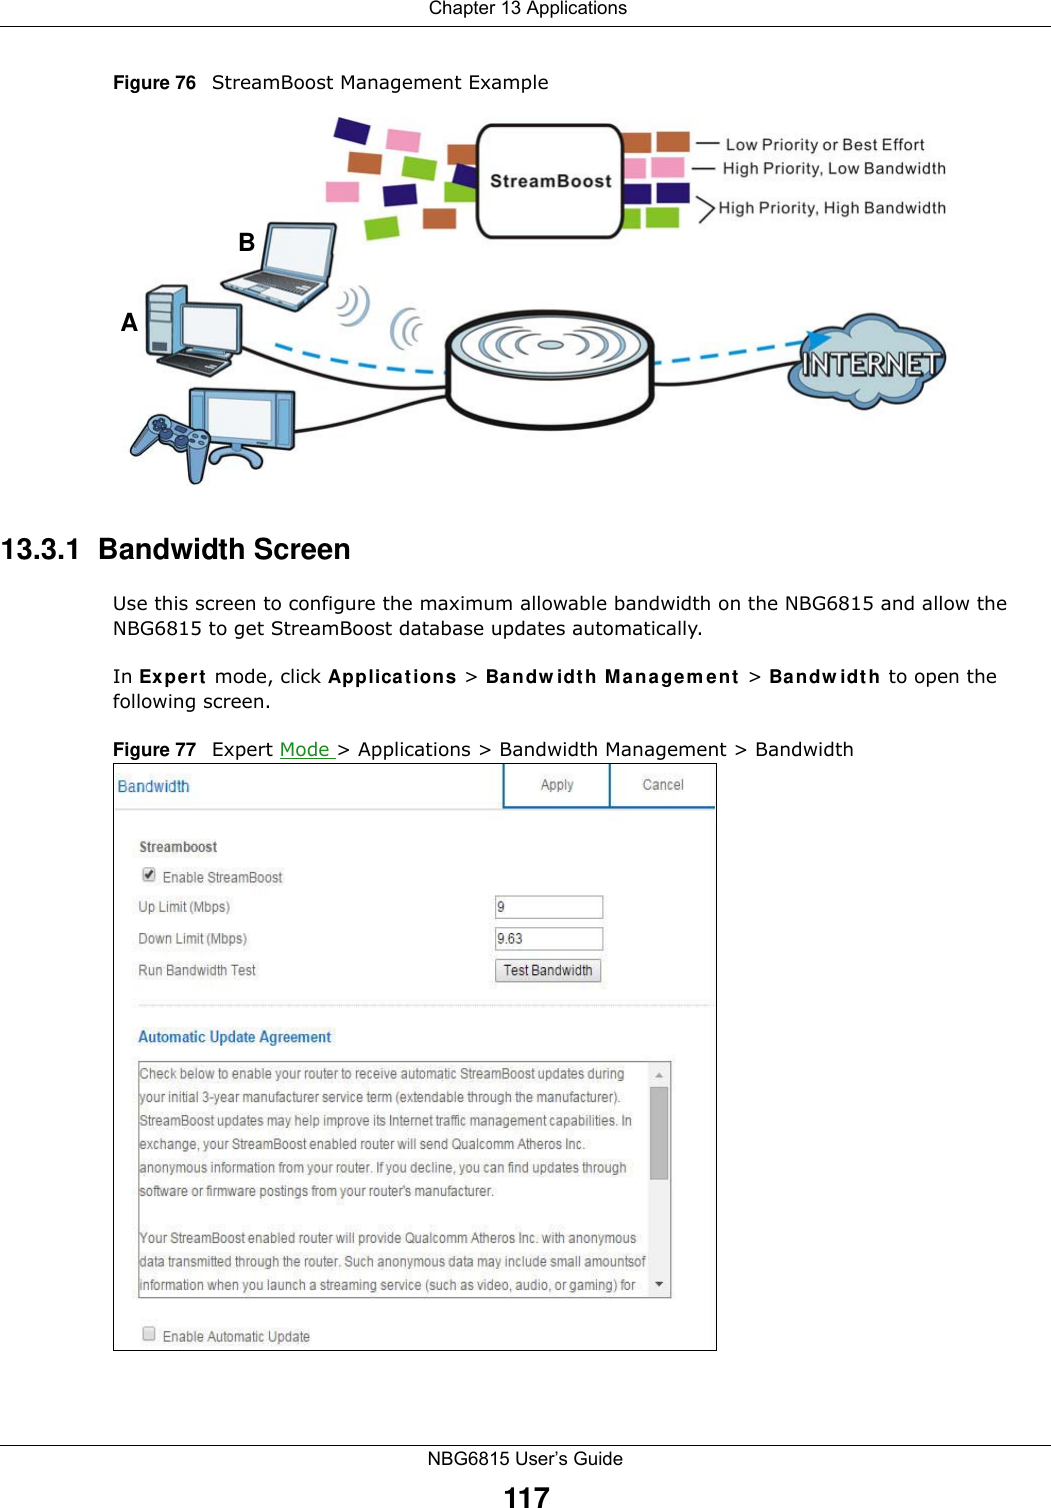  Chapter 13 ApplicationsNBG6815 User’s Guide117Figure 76   StreamBoost Management Example13.3.1  Bandwidth ScreenUse this screen to configure the maximum allowable bandwidth on the NBG6815 and allow the NBG6815 to get StreamBoost database updates automatically.In Expert mode, click Applications &gt; Bandwidth Management &gt; Bandwidth to open the following screen.Figure 77   Expert Mode &gt; Applications &gt; Bandwidth Management &gt; Bandwidth AB